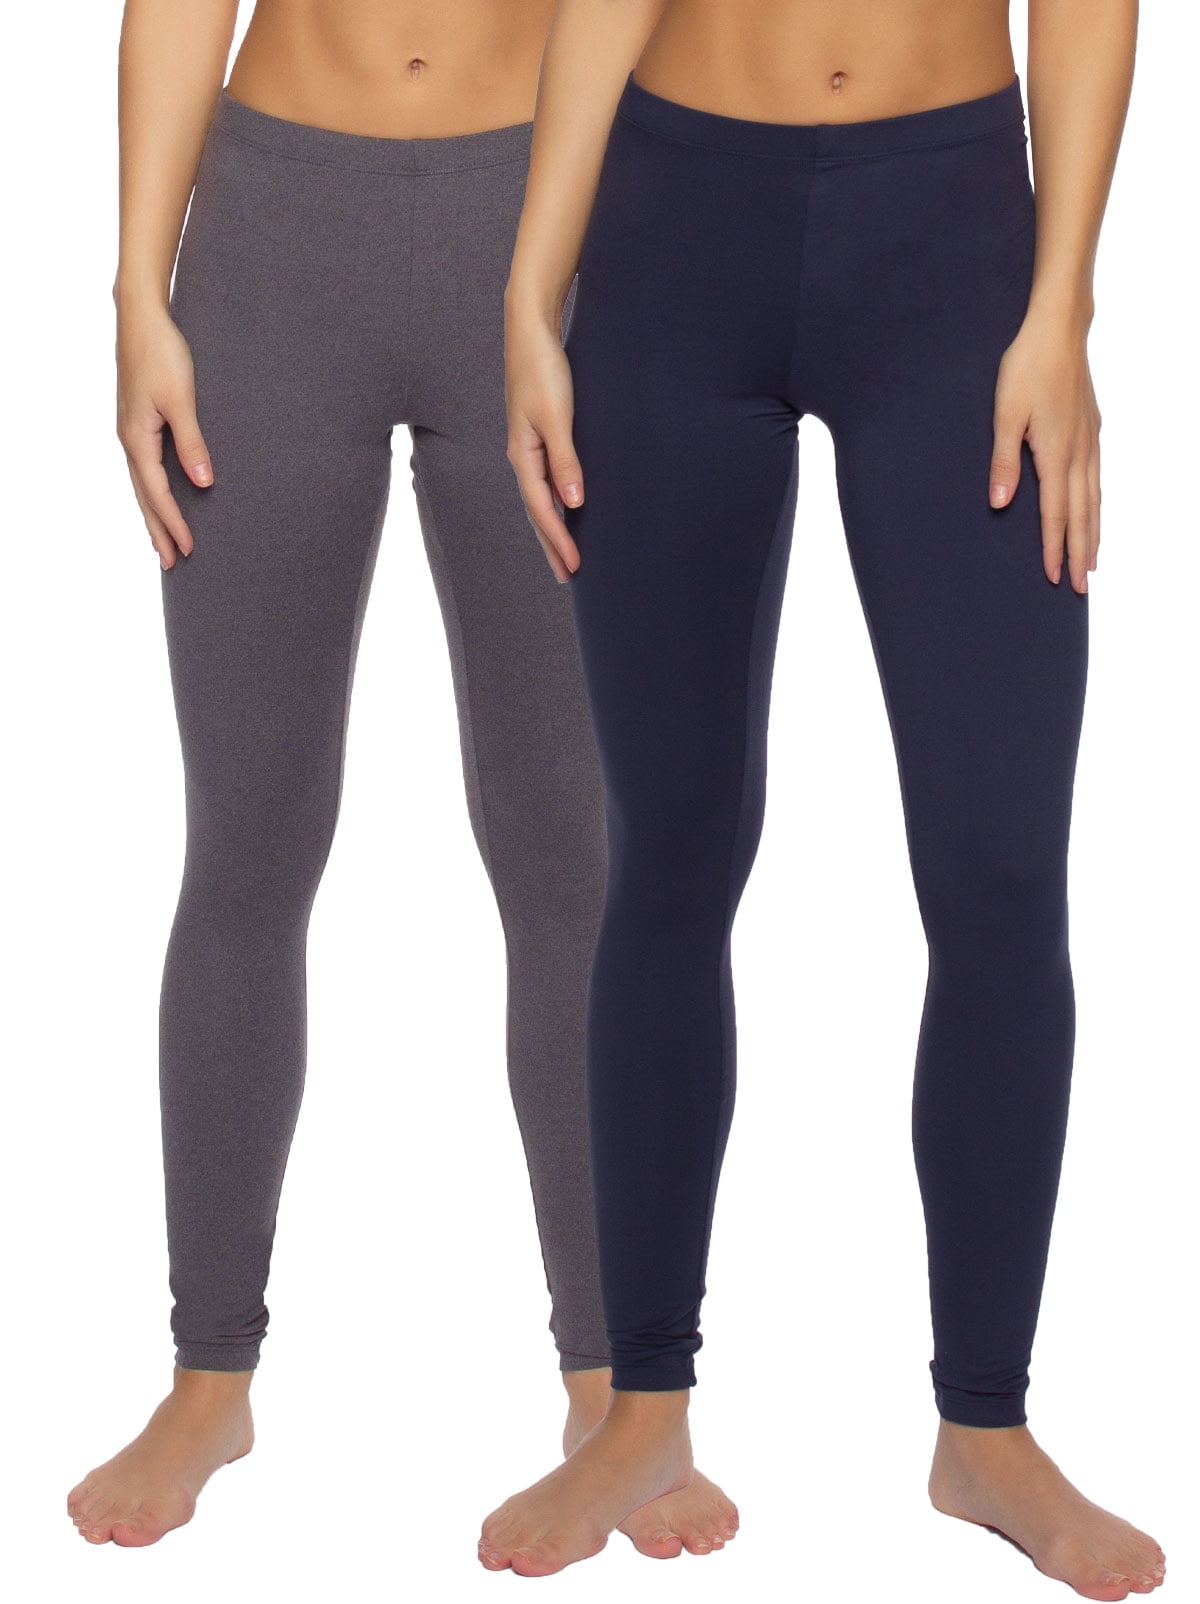 Felina Cotton Modal Leggings (2-Pack) Extra Lightweight Breathable Leggings  for Women, Lounge Pants, Style: C2201 (Navy Charcoal, Small)